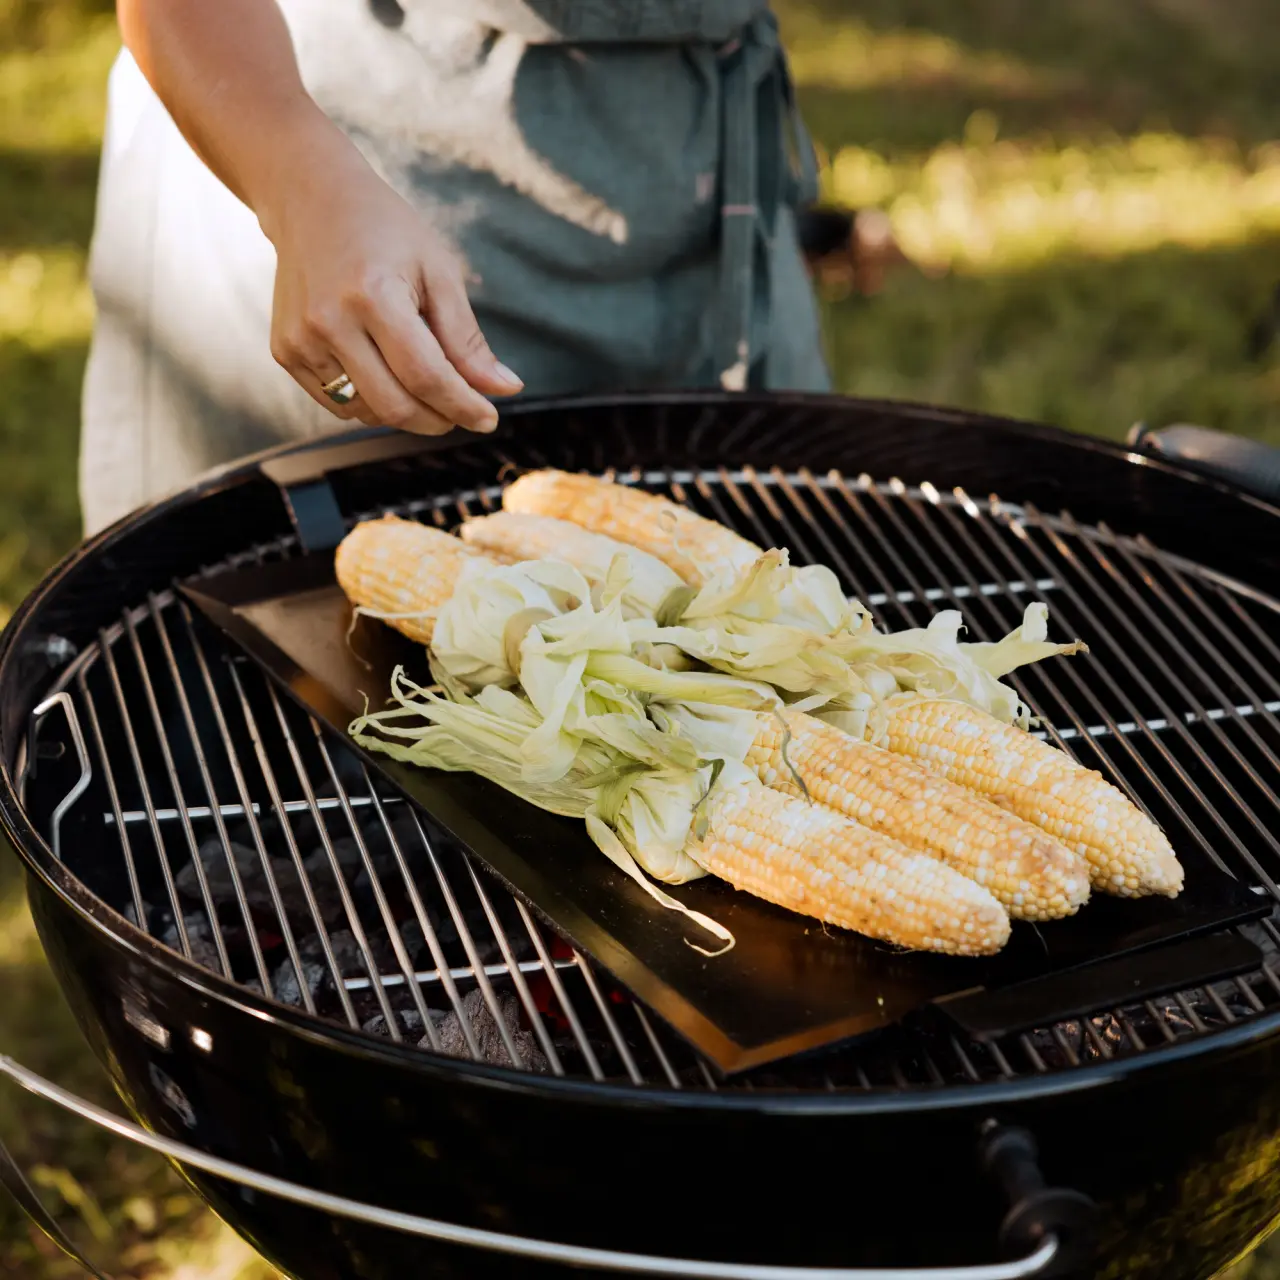 A person seasons corn on the cob on a charcoal grill outdoors.